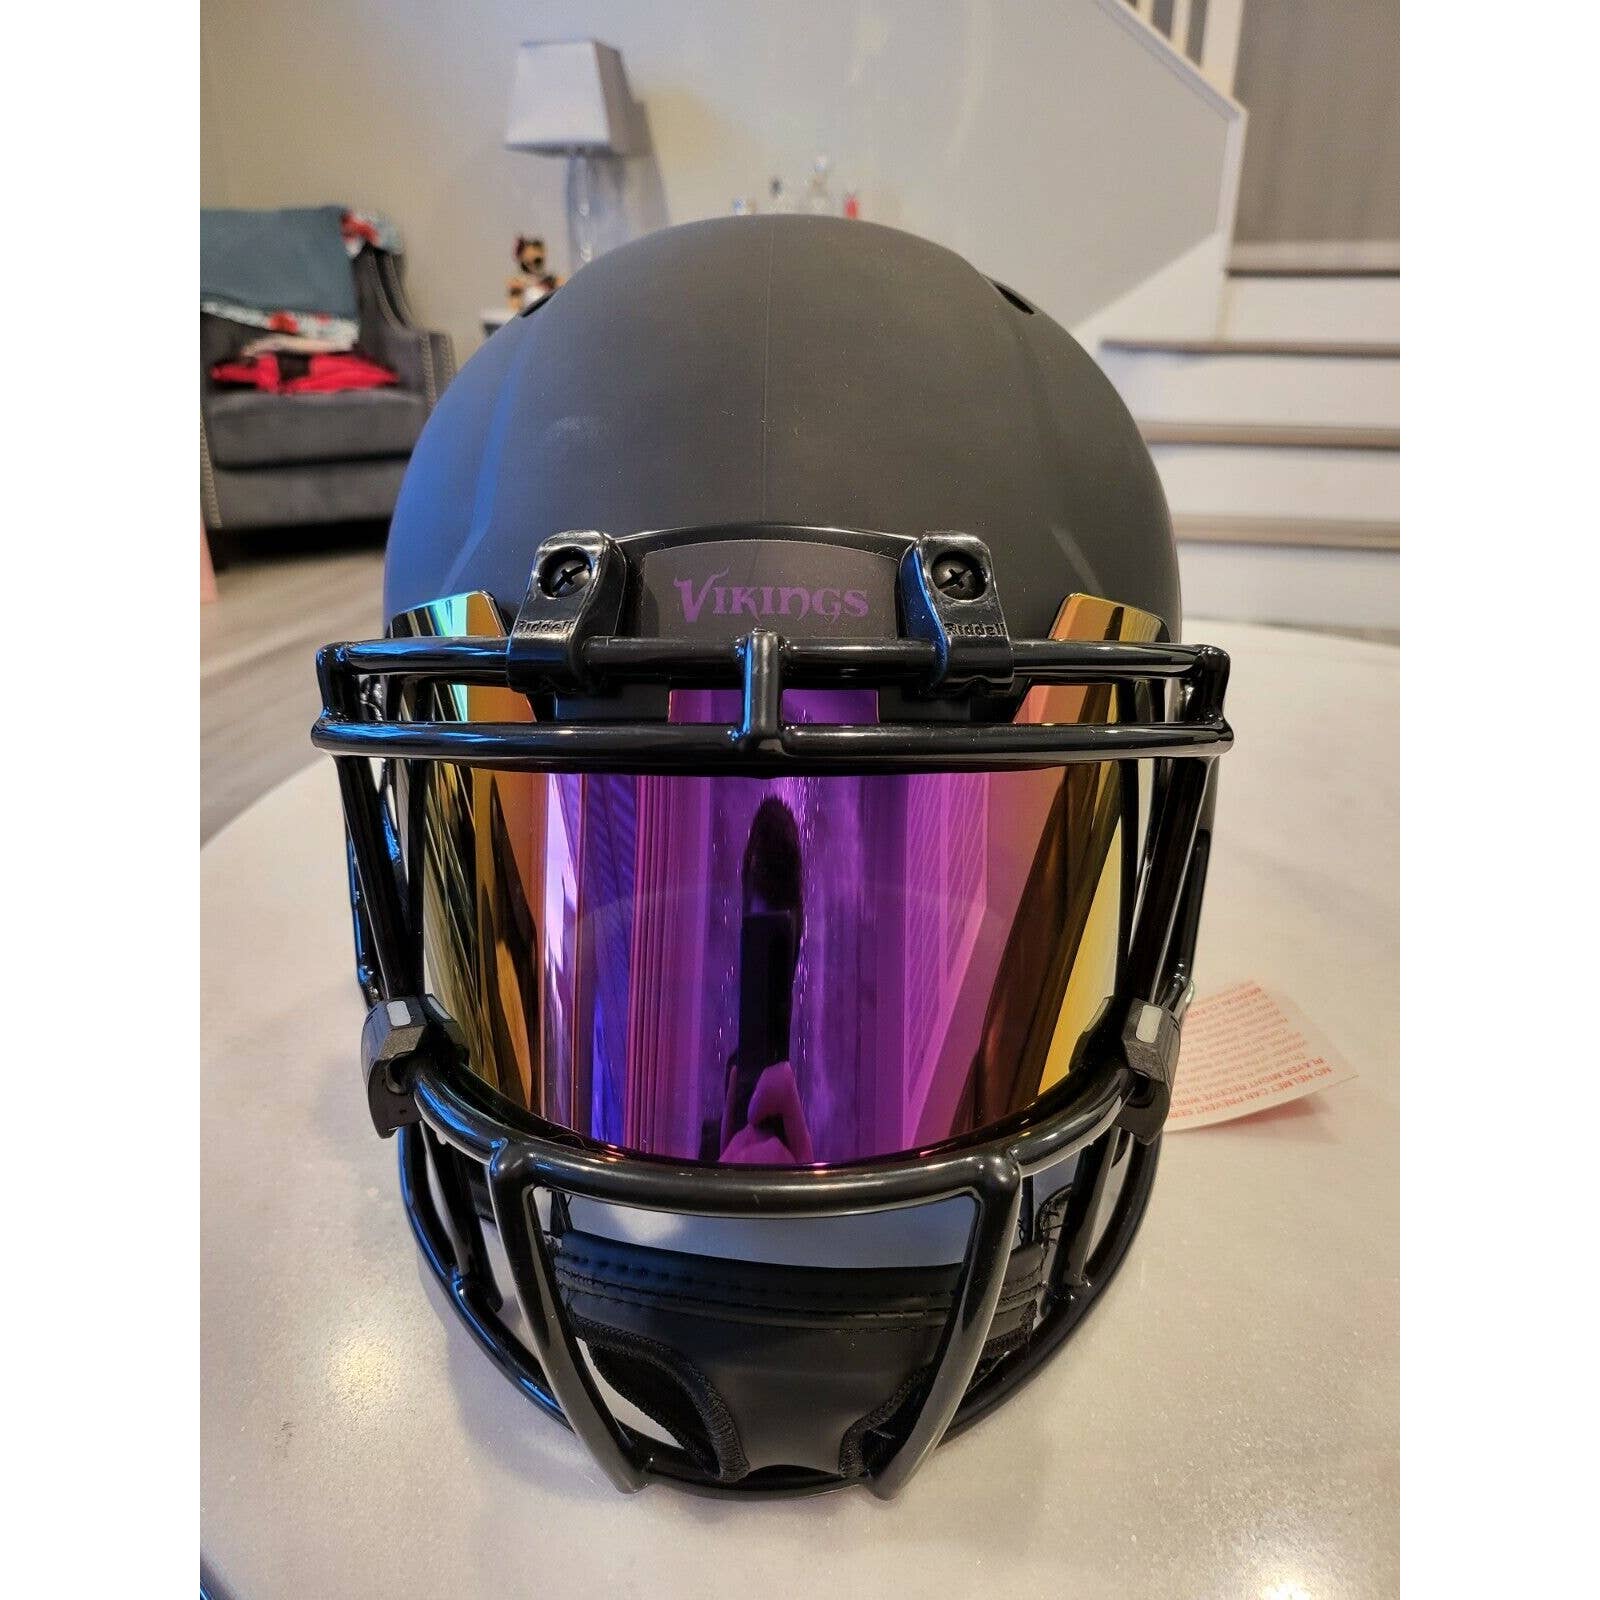 Adrian Peterson Autographed/Signed Authentic Full Size Helmet Eclipse Visor - TreasuresEvolved